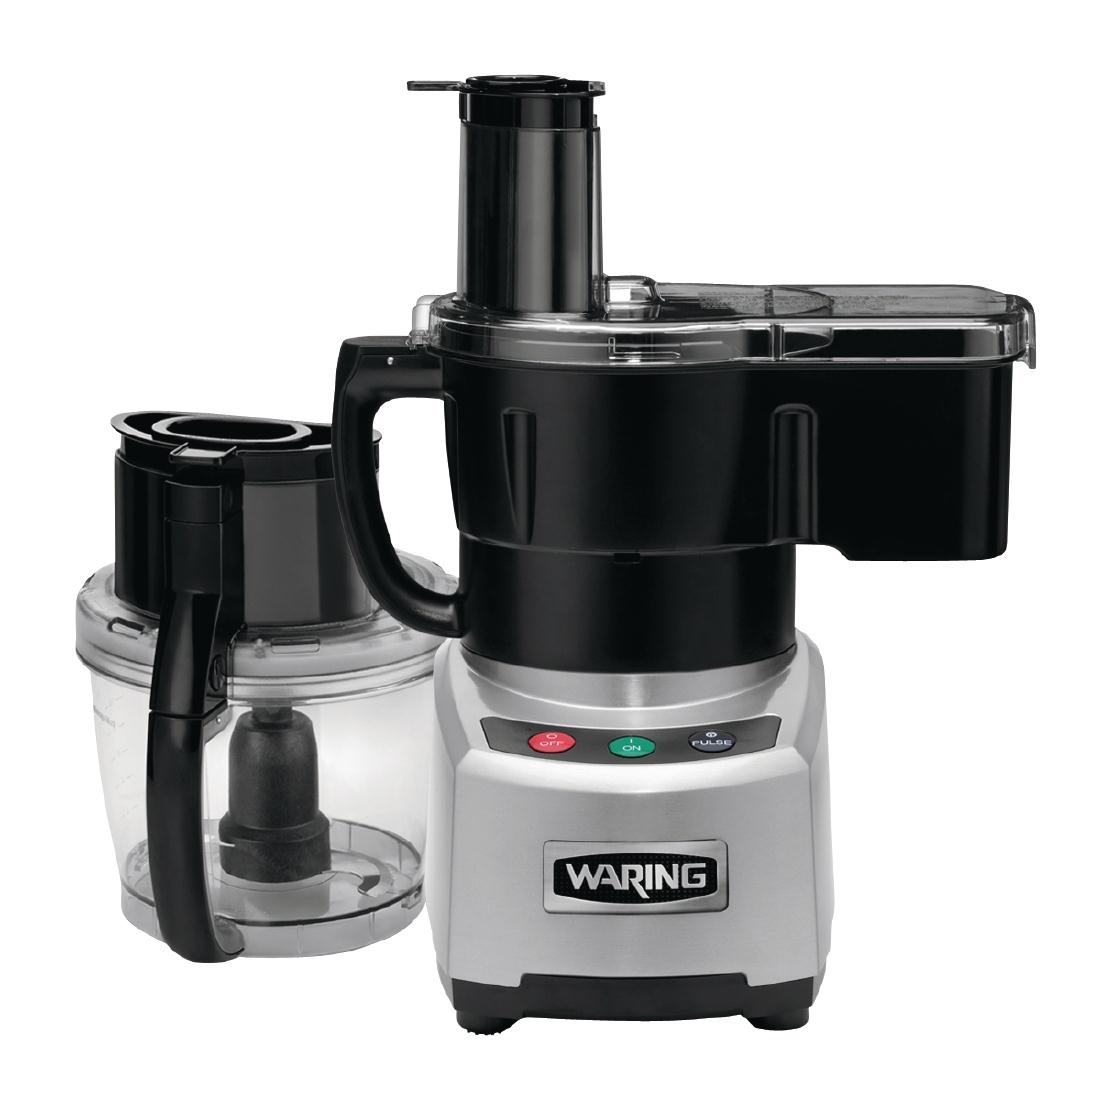 Waring Food Processor with Continuous Feed